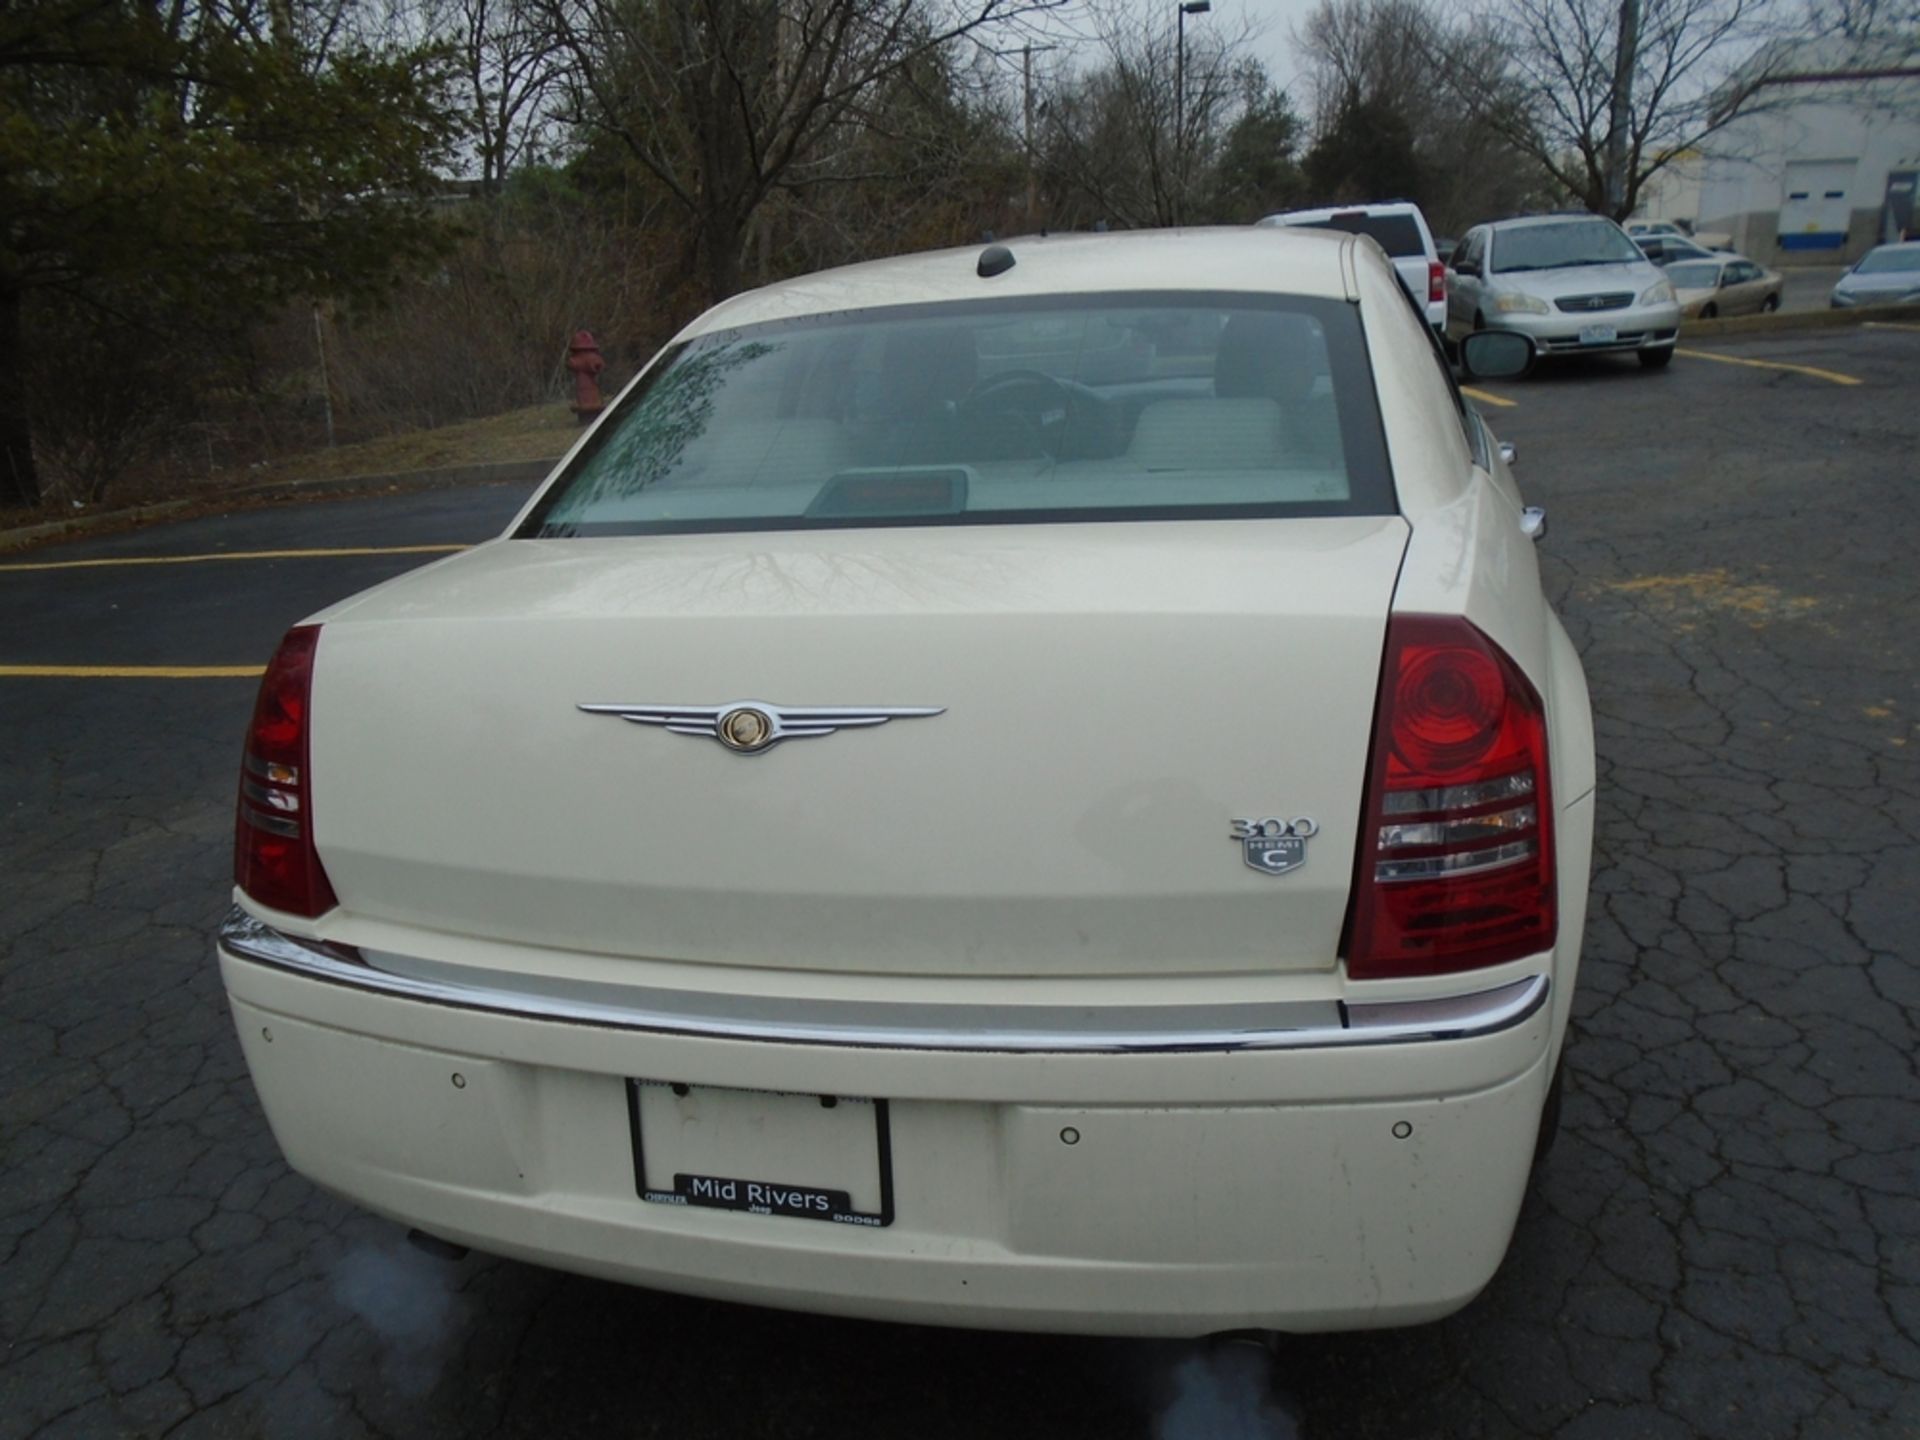 2005 Chrysler 300C Leather Interior Brand New Tires Full Spare Tire AC, Navigation, Blue Tooth - Image 4 of 13